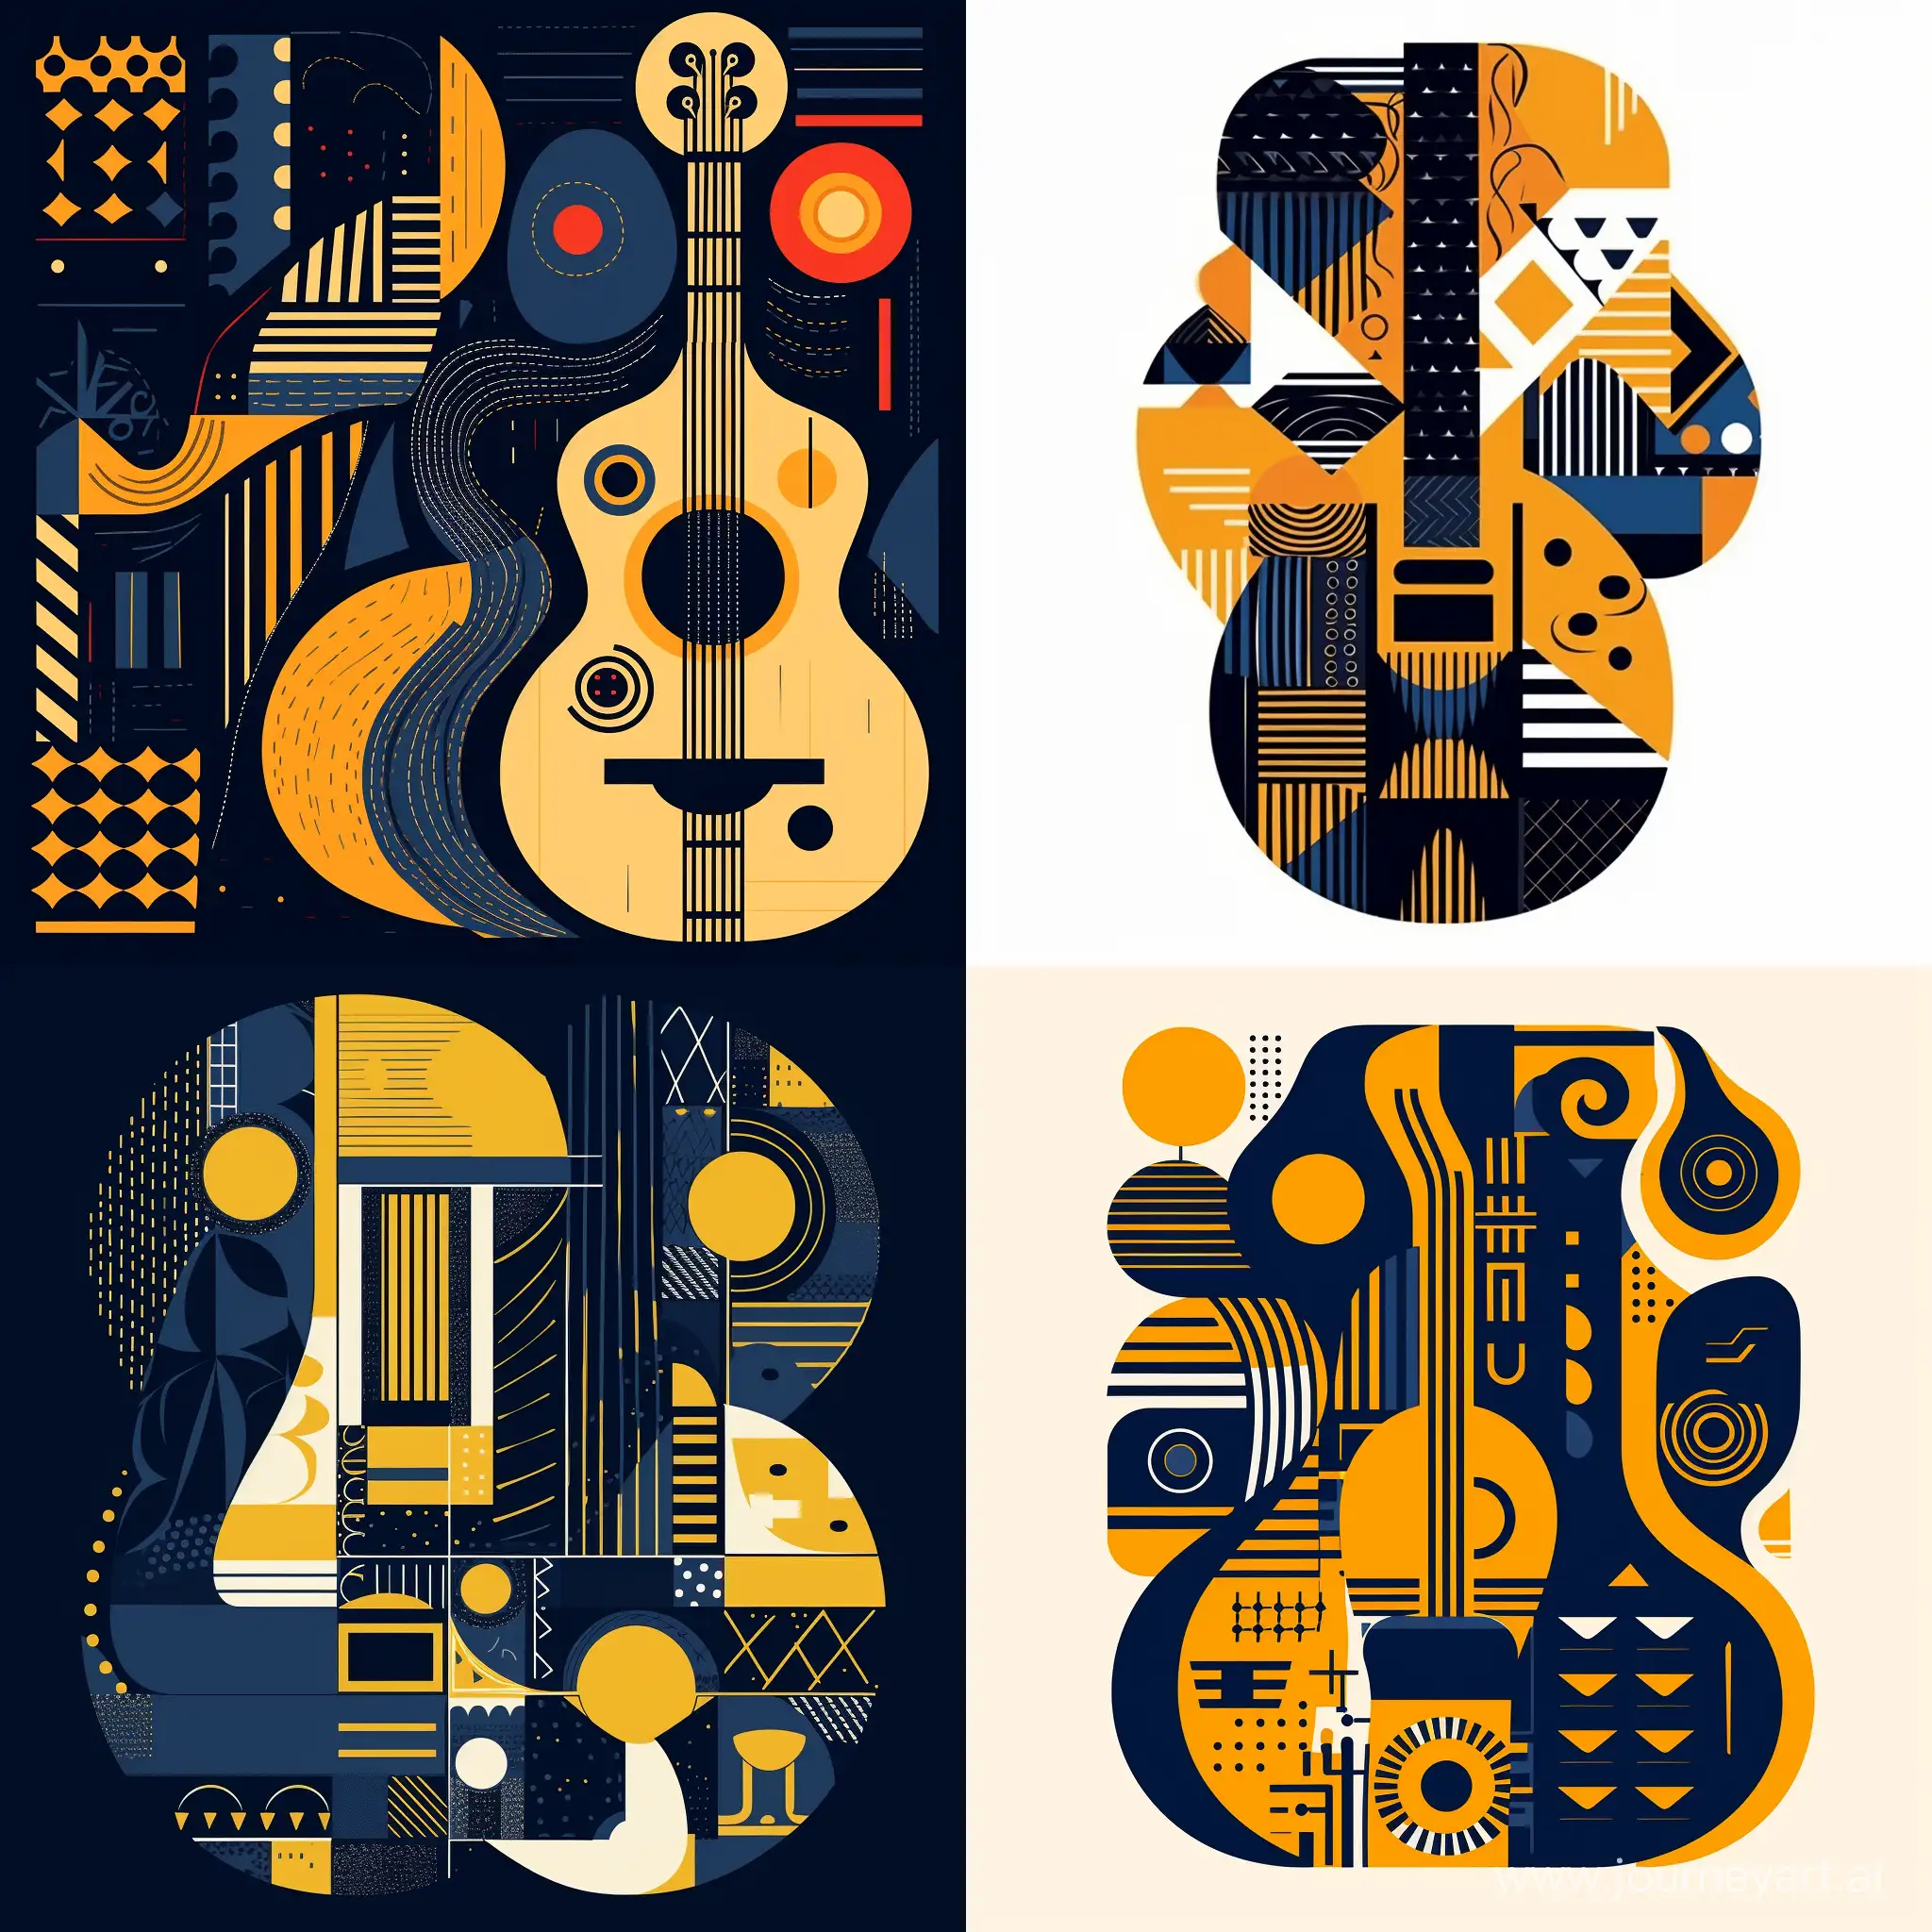 Abstract-AfricanInspired-Geometric-Guitar-Illustration-in-Navy-and-Yellow